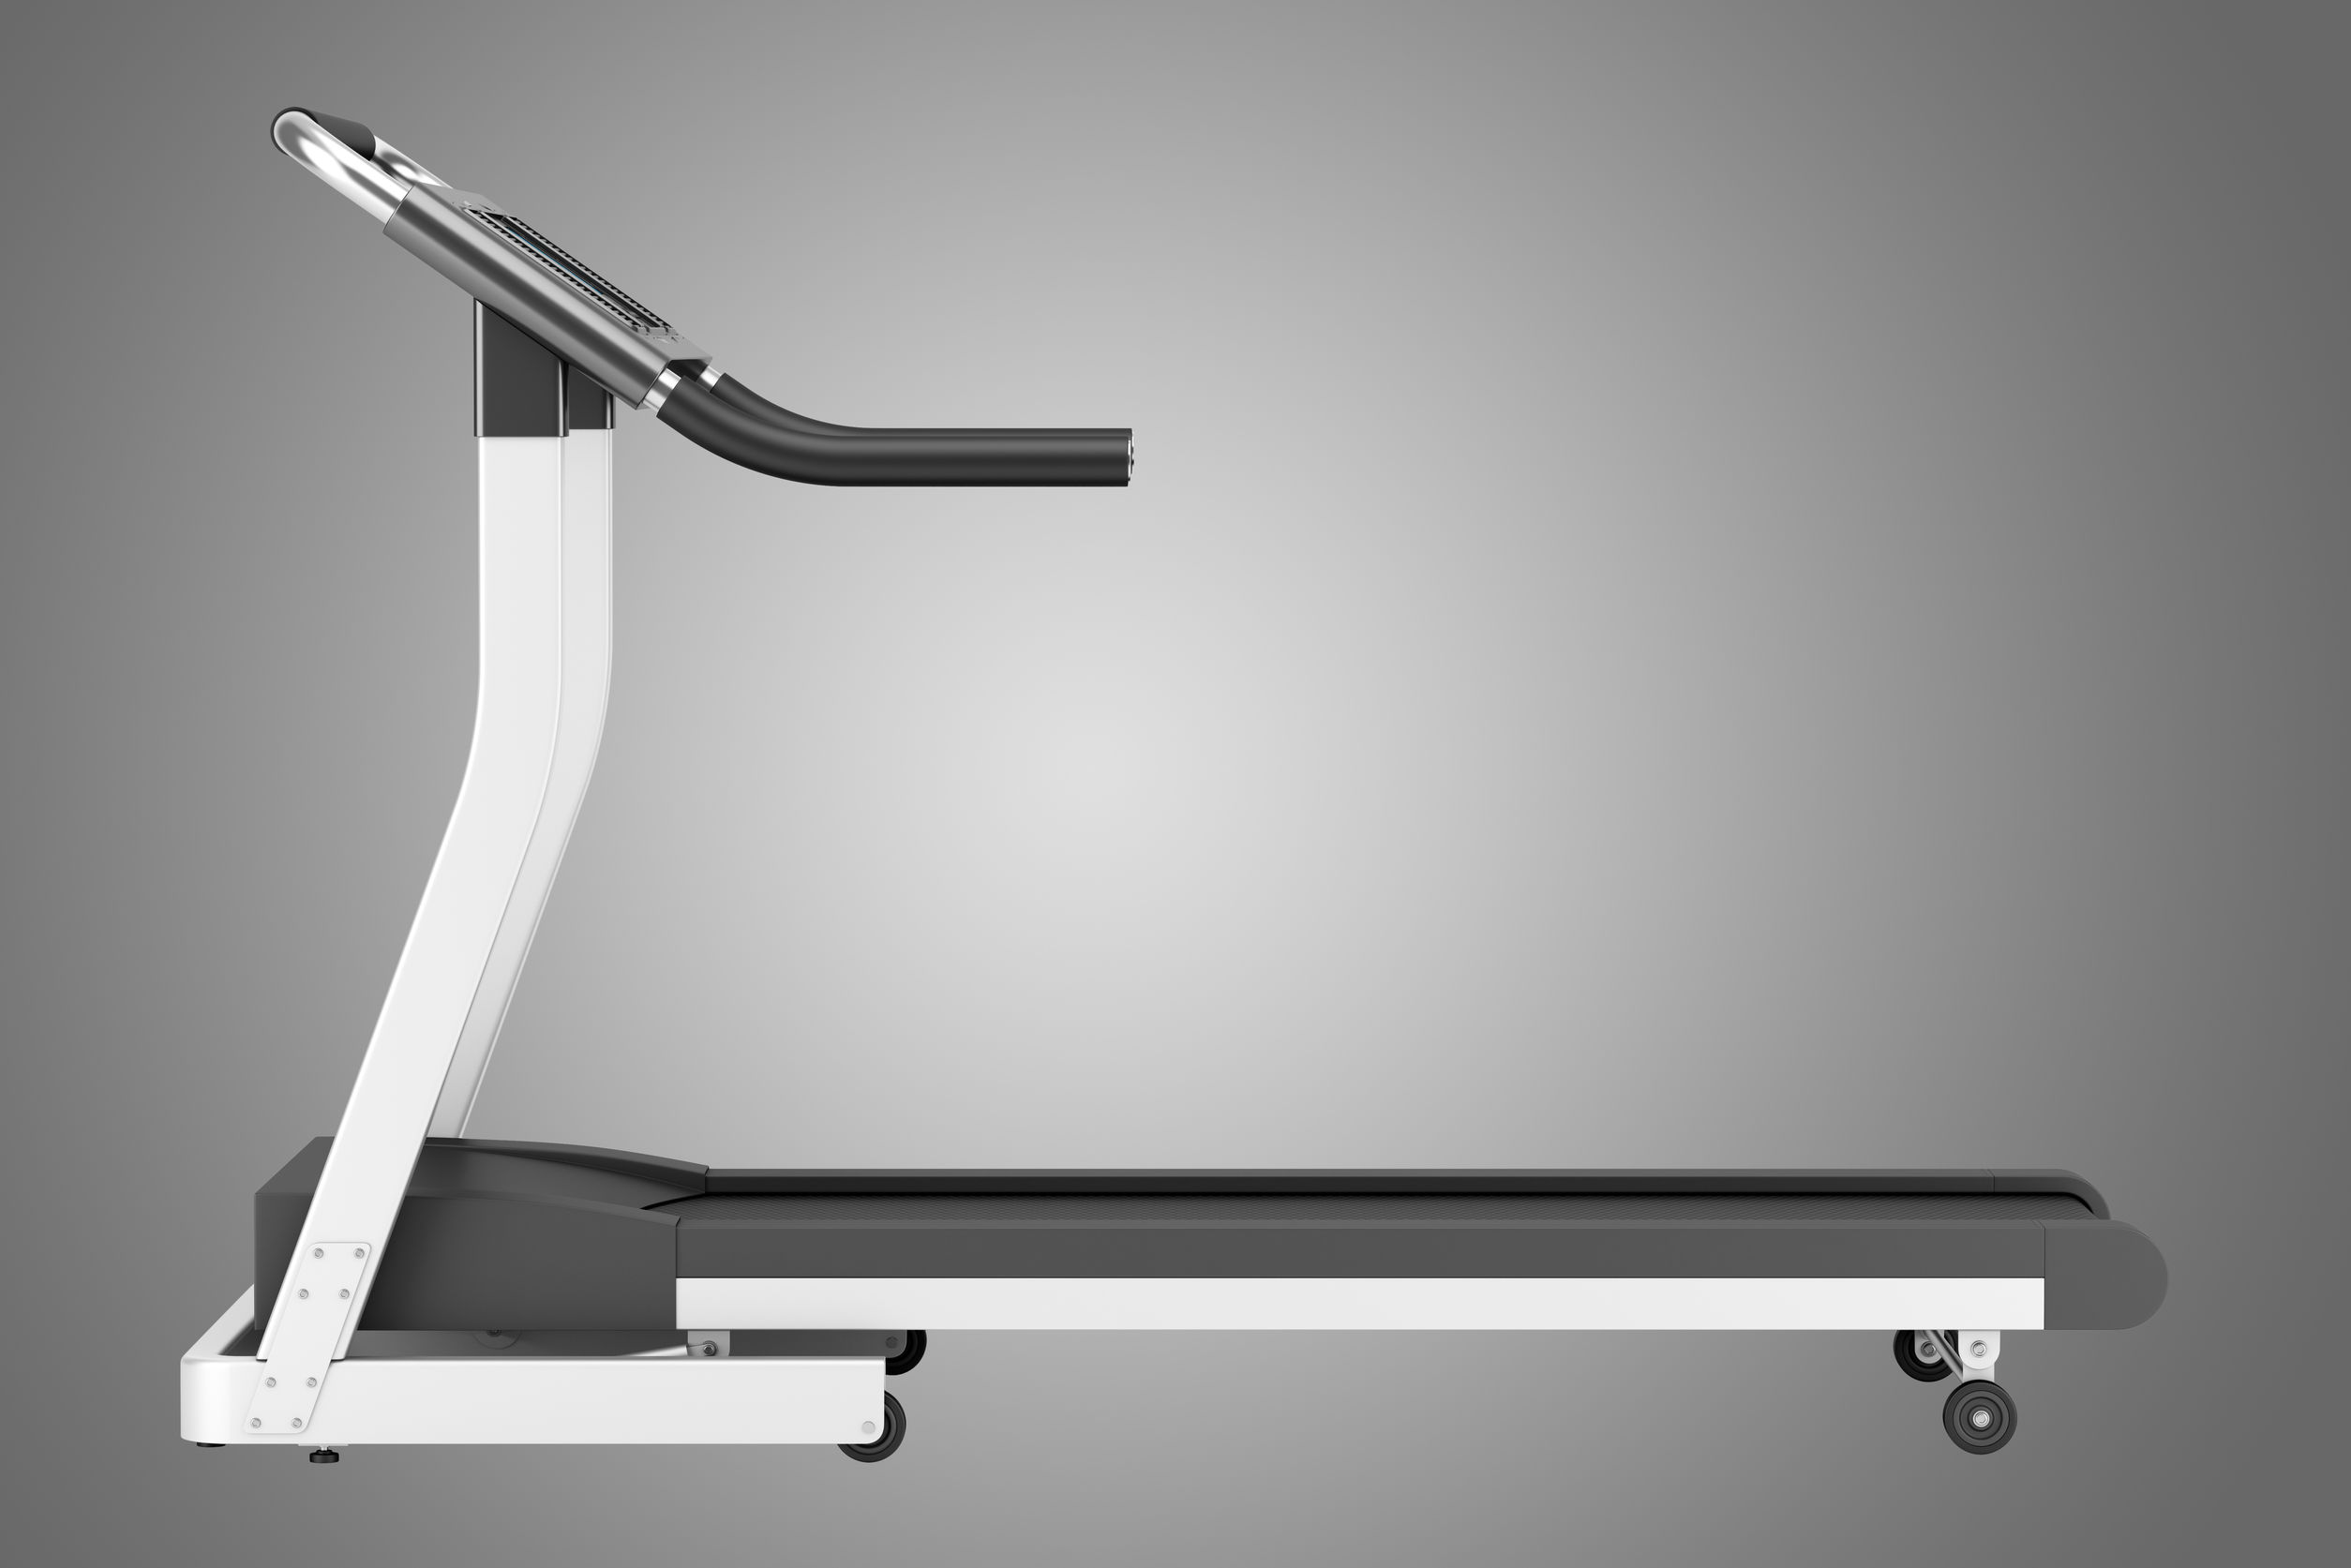 how much does it cost to ship a treadmill?